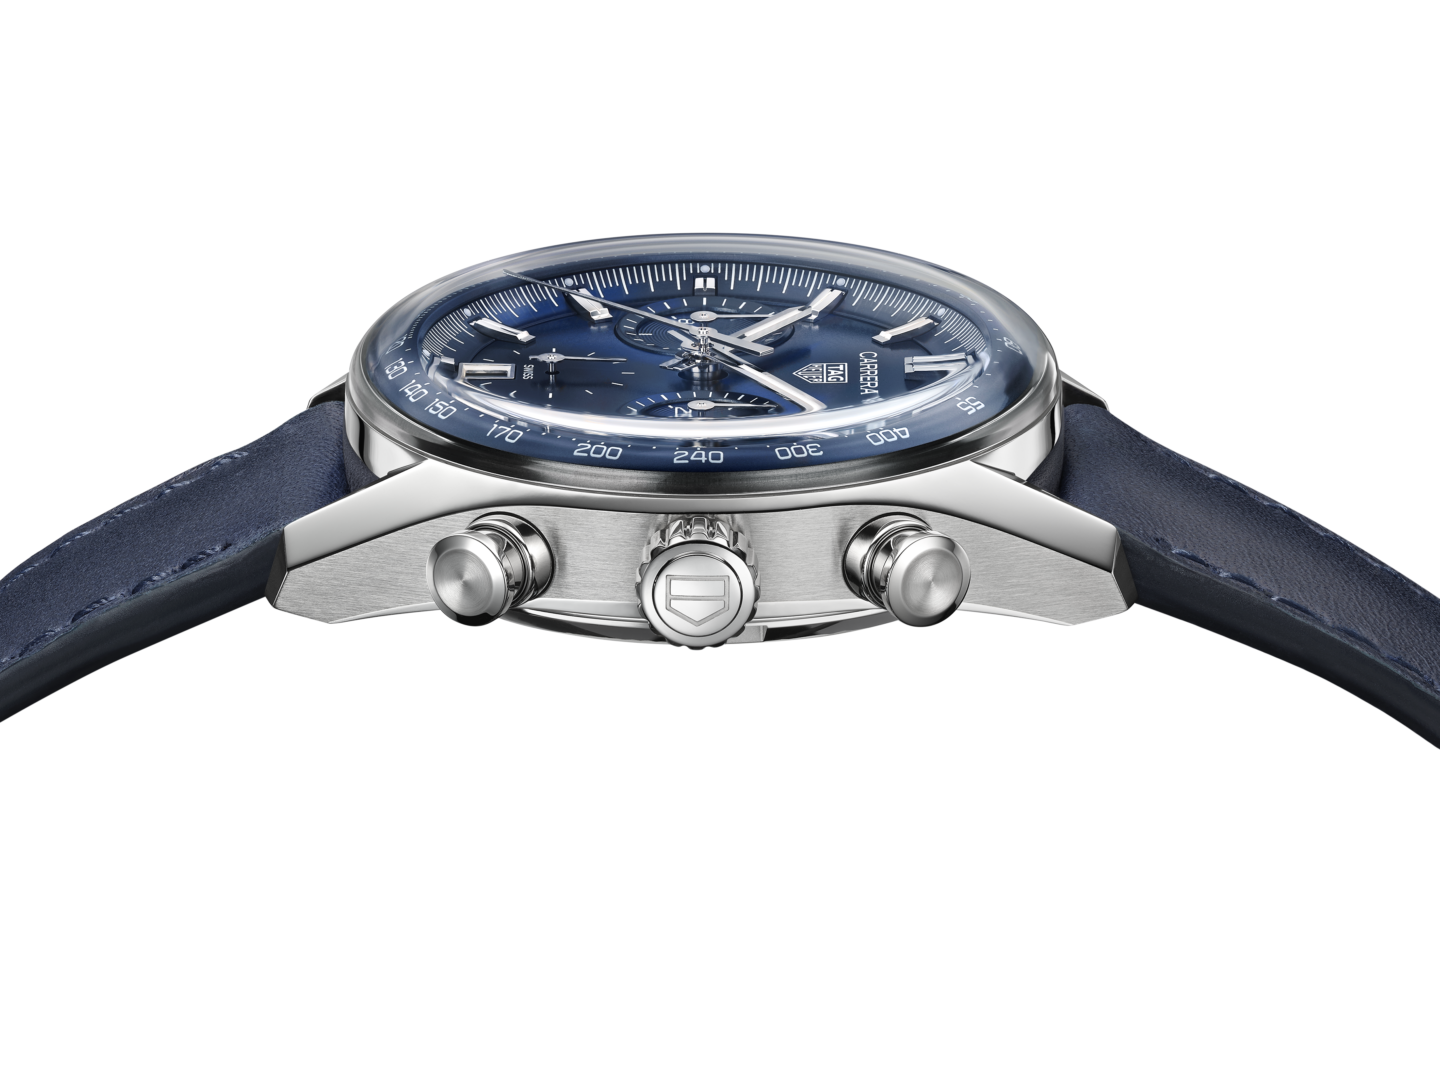 Tag Heuer Carrera Chronograph Glassbox Blue Dial Leather Strap